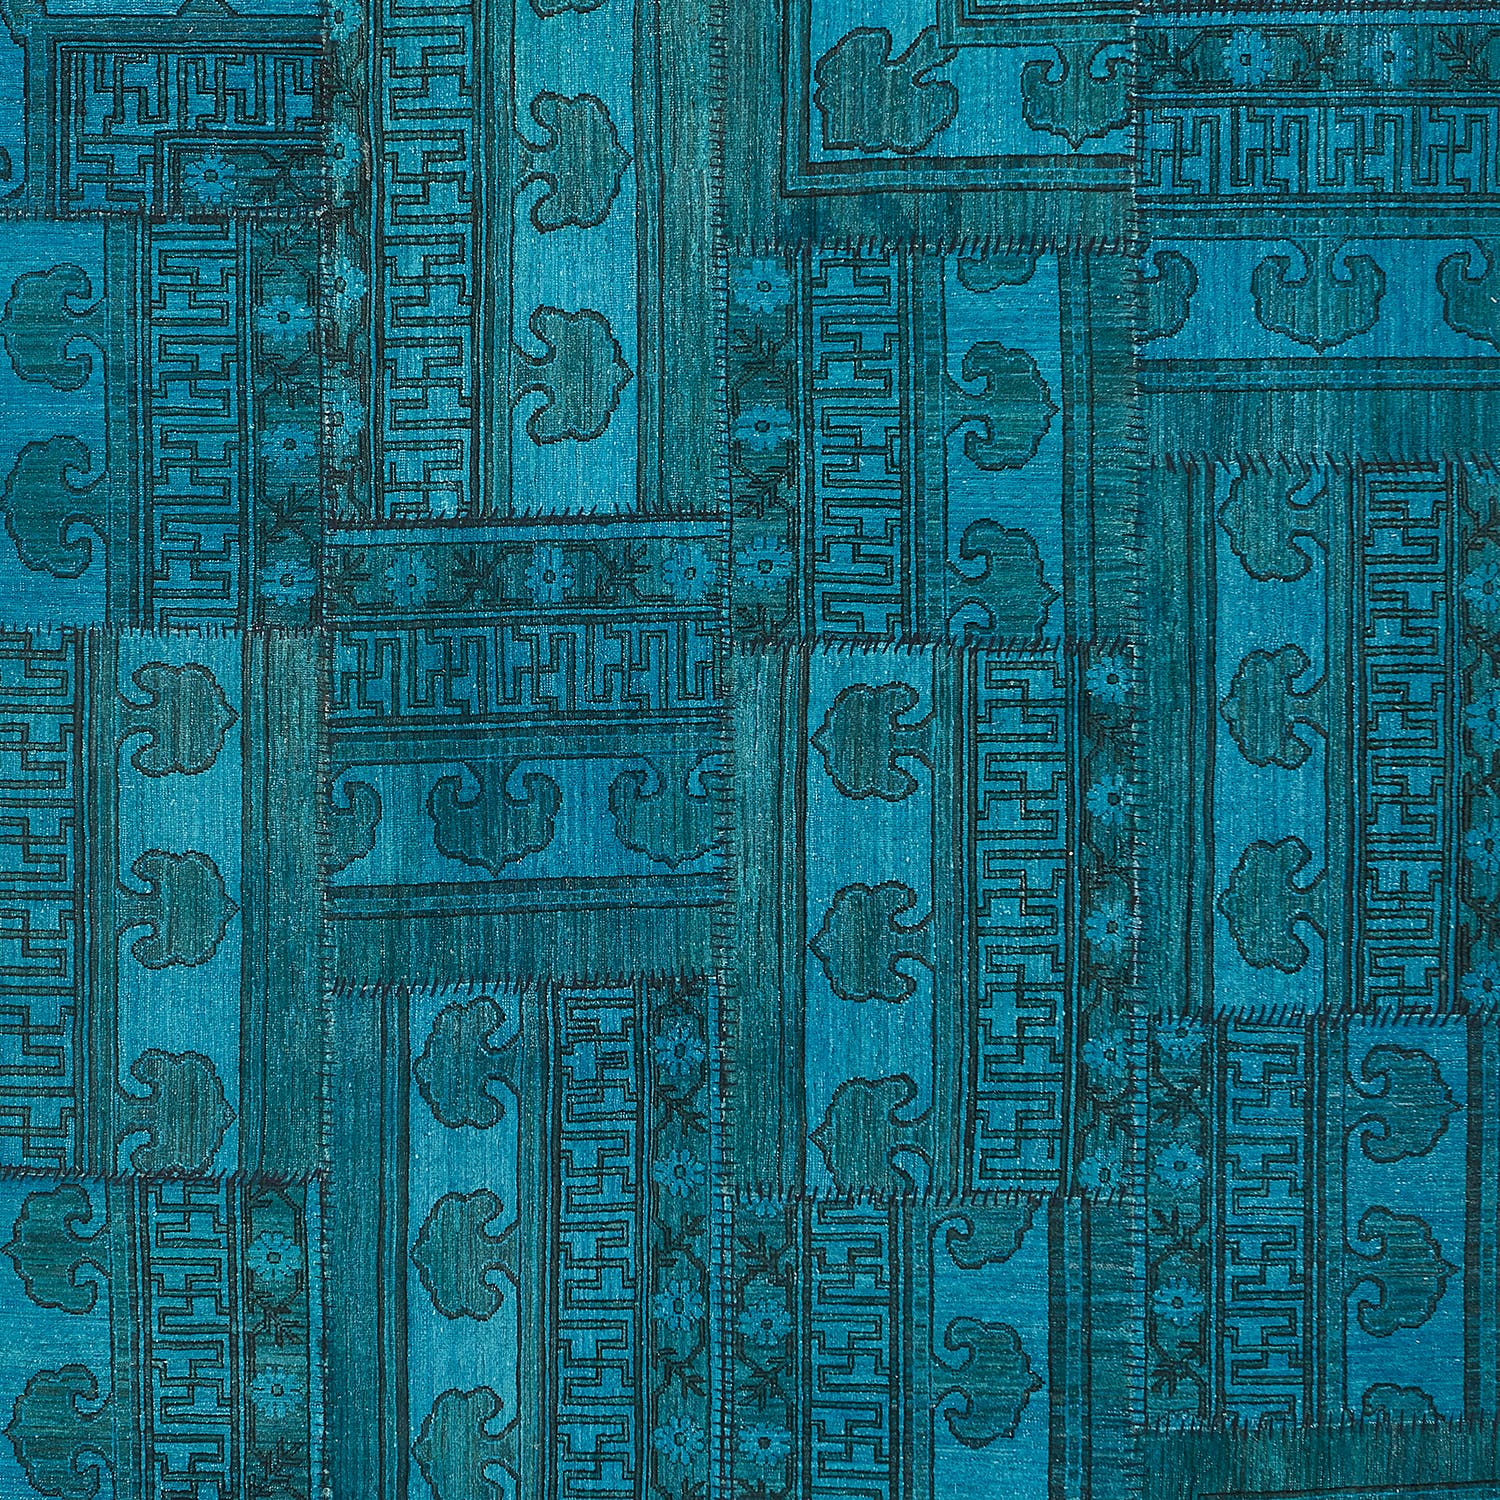 Intricate blue patterned fabric with Asian-inspired motifs and vintage charm.